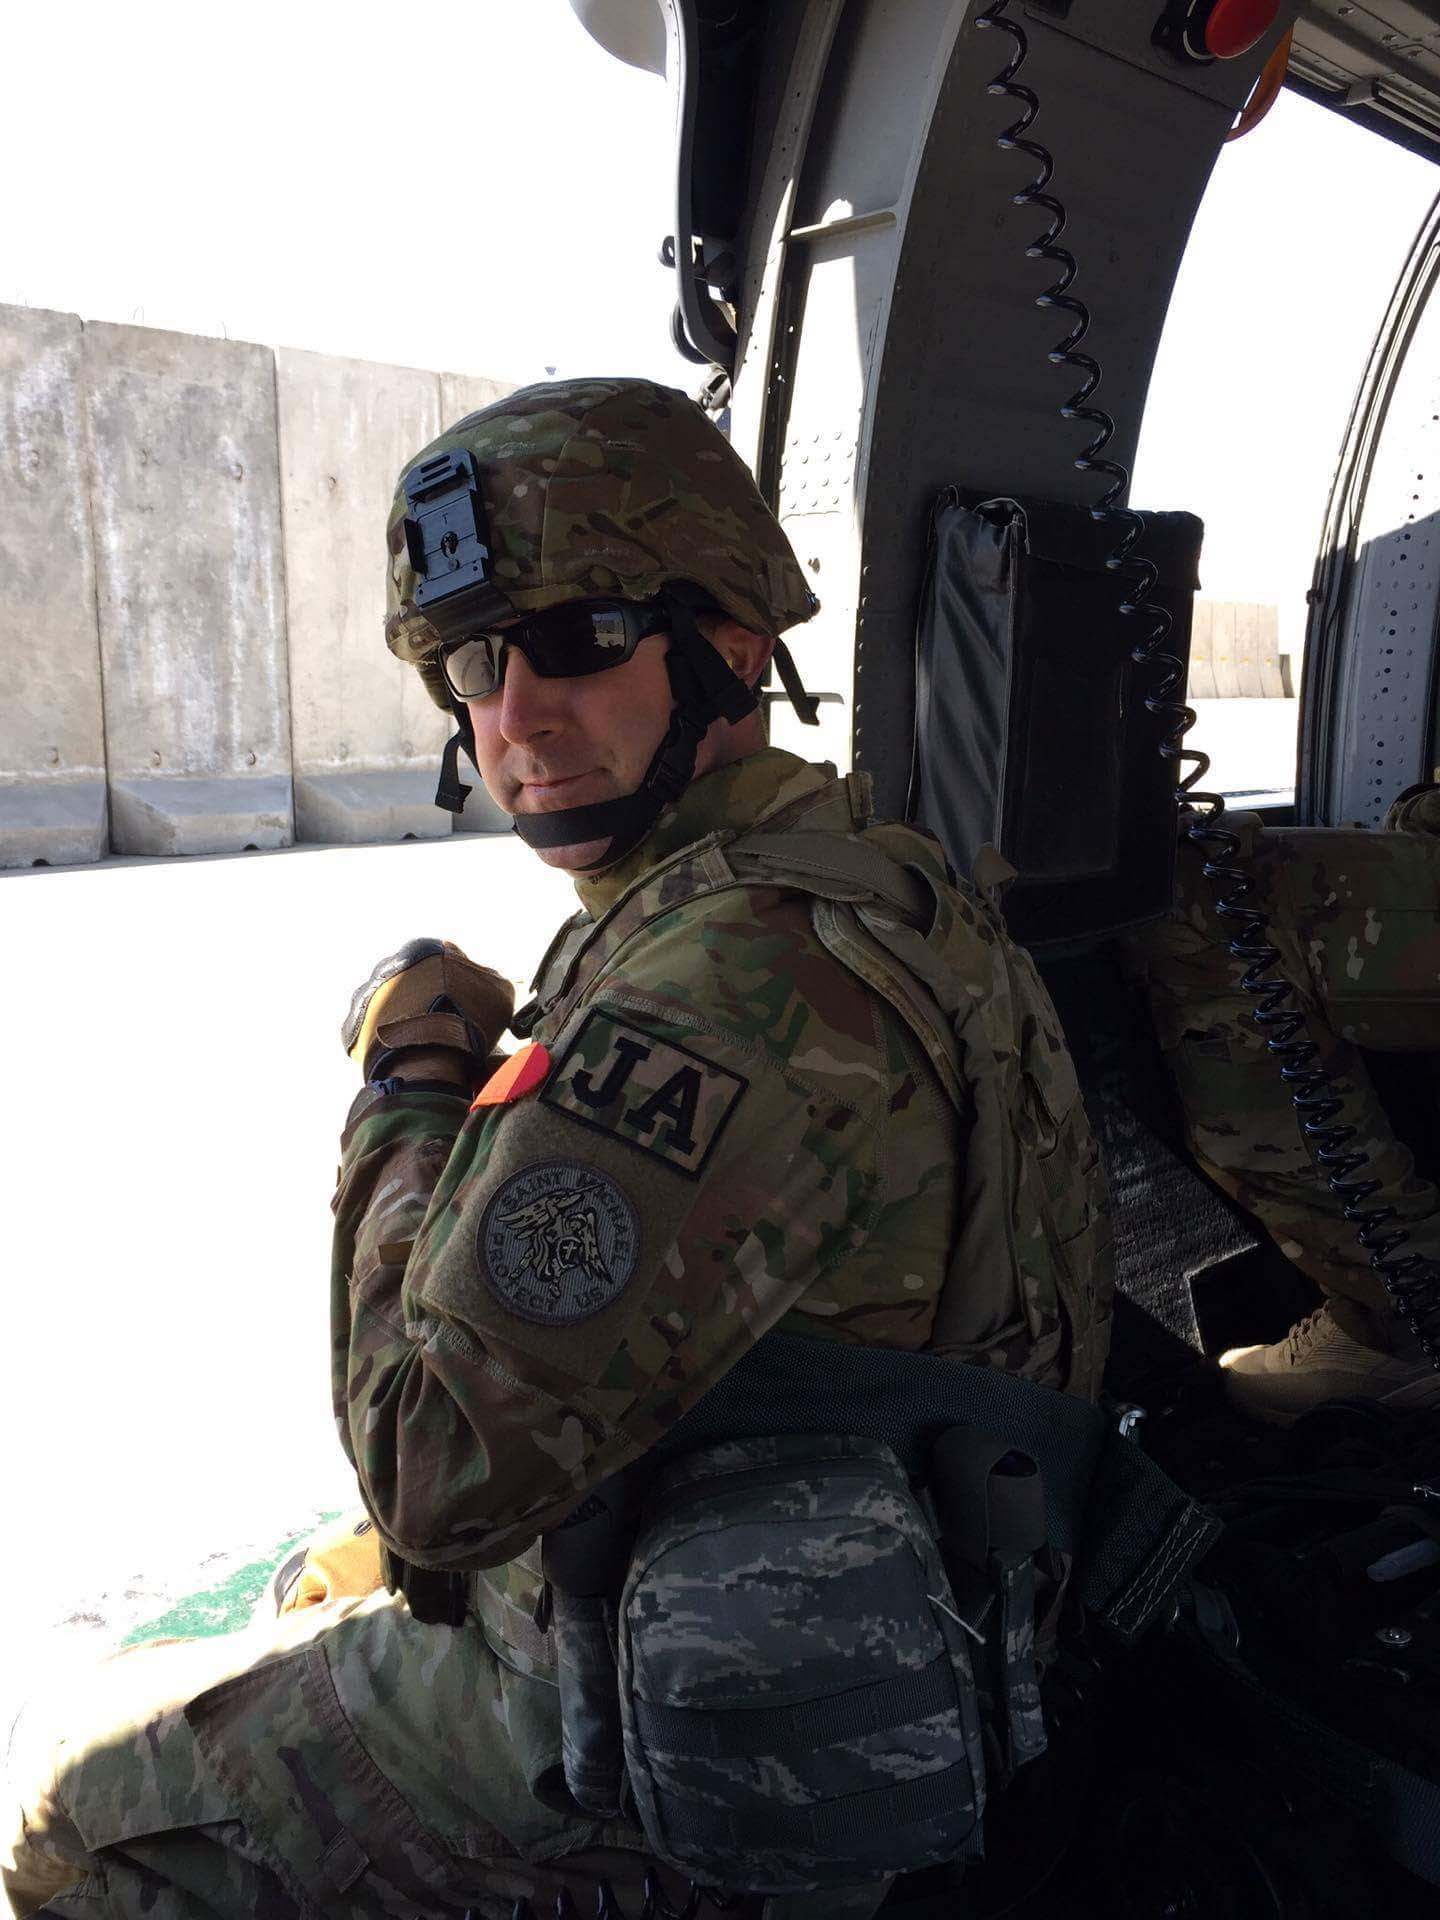 Dale Riedel in military gear in a vehicle